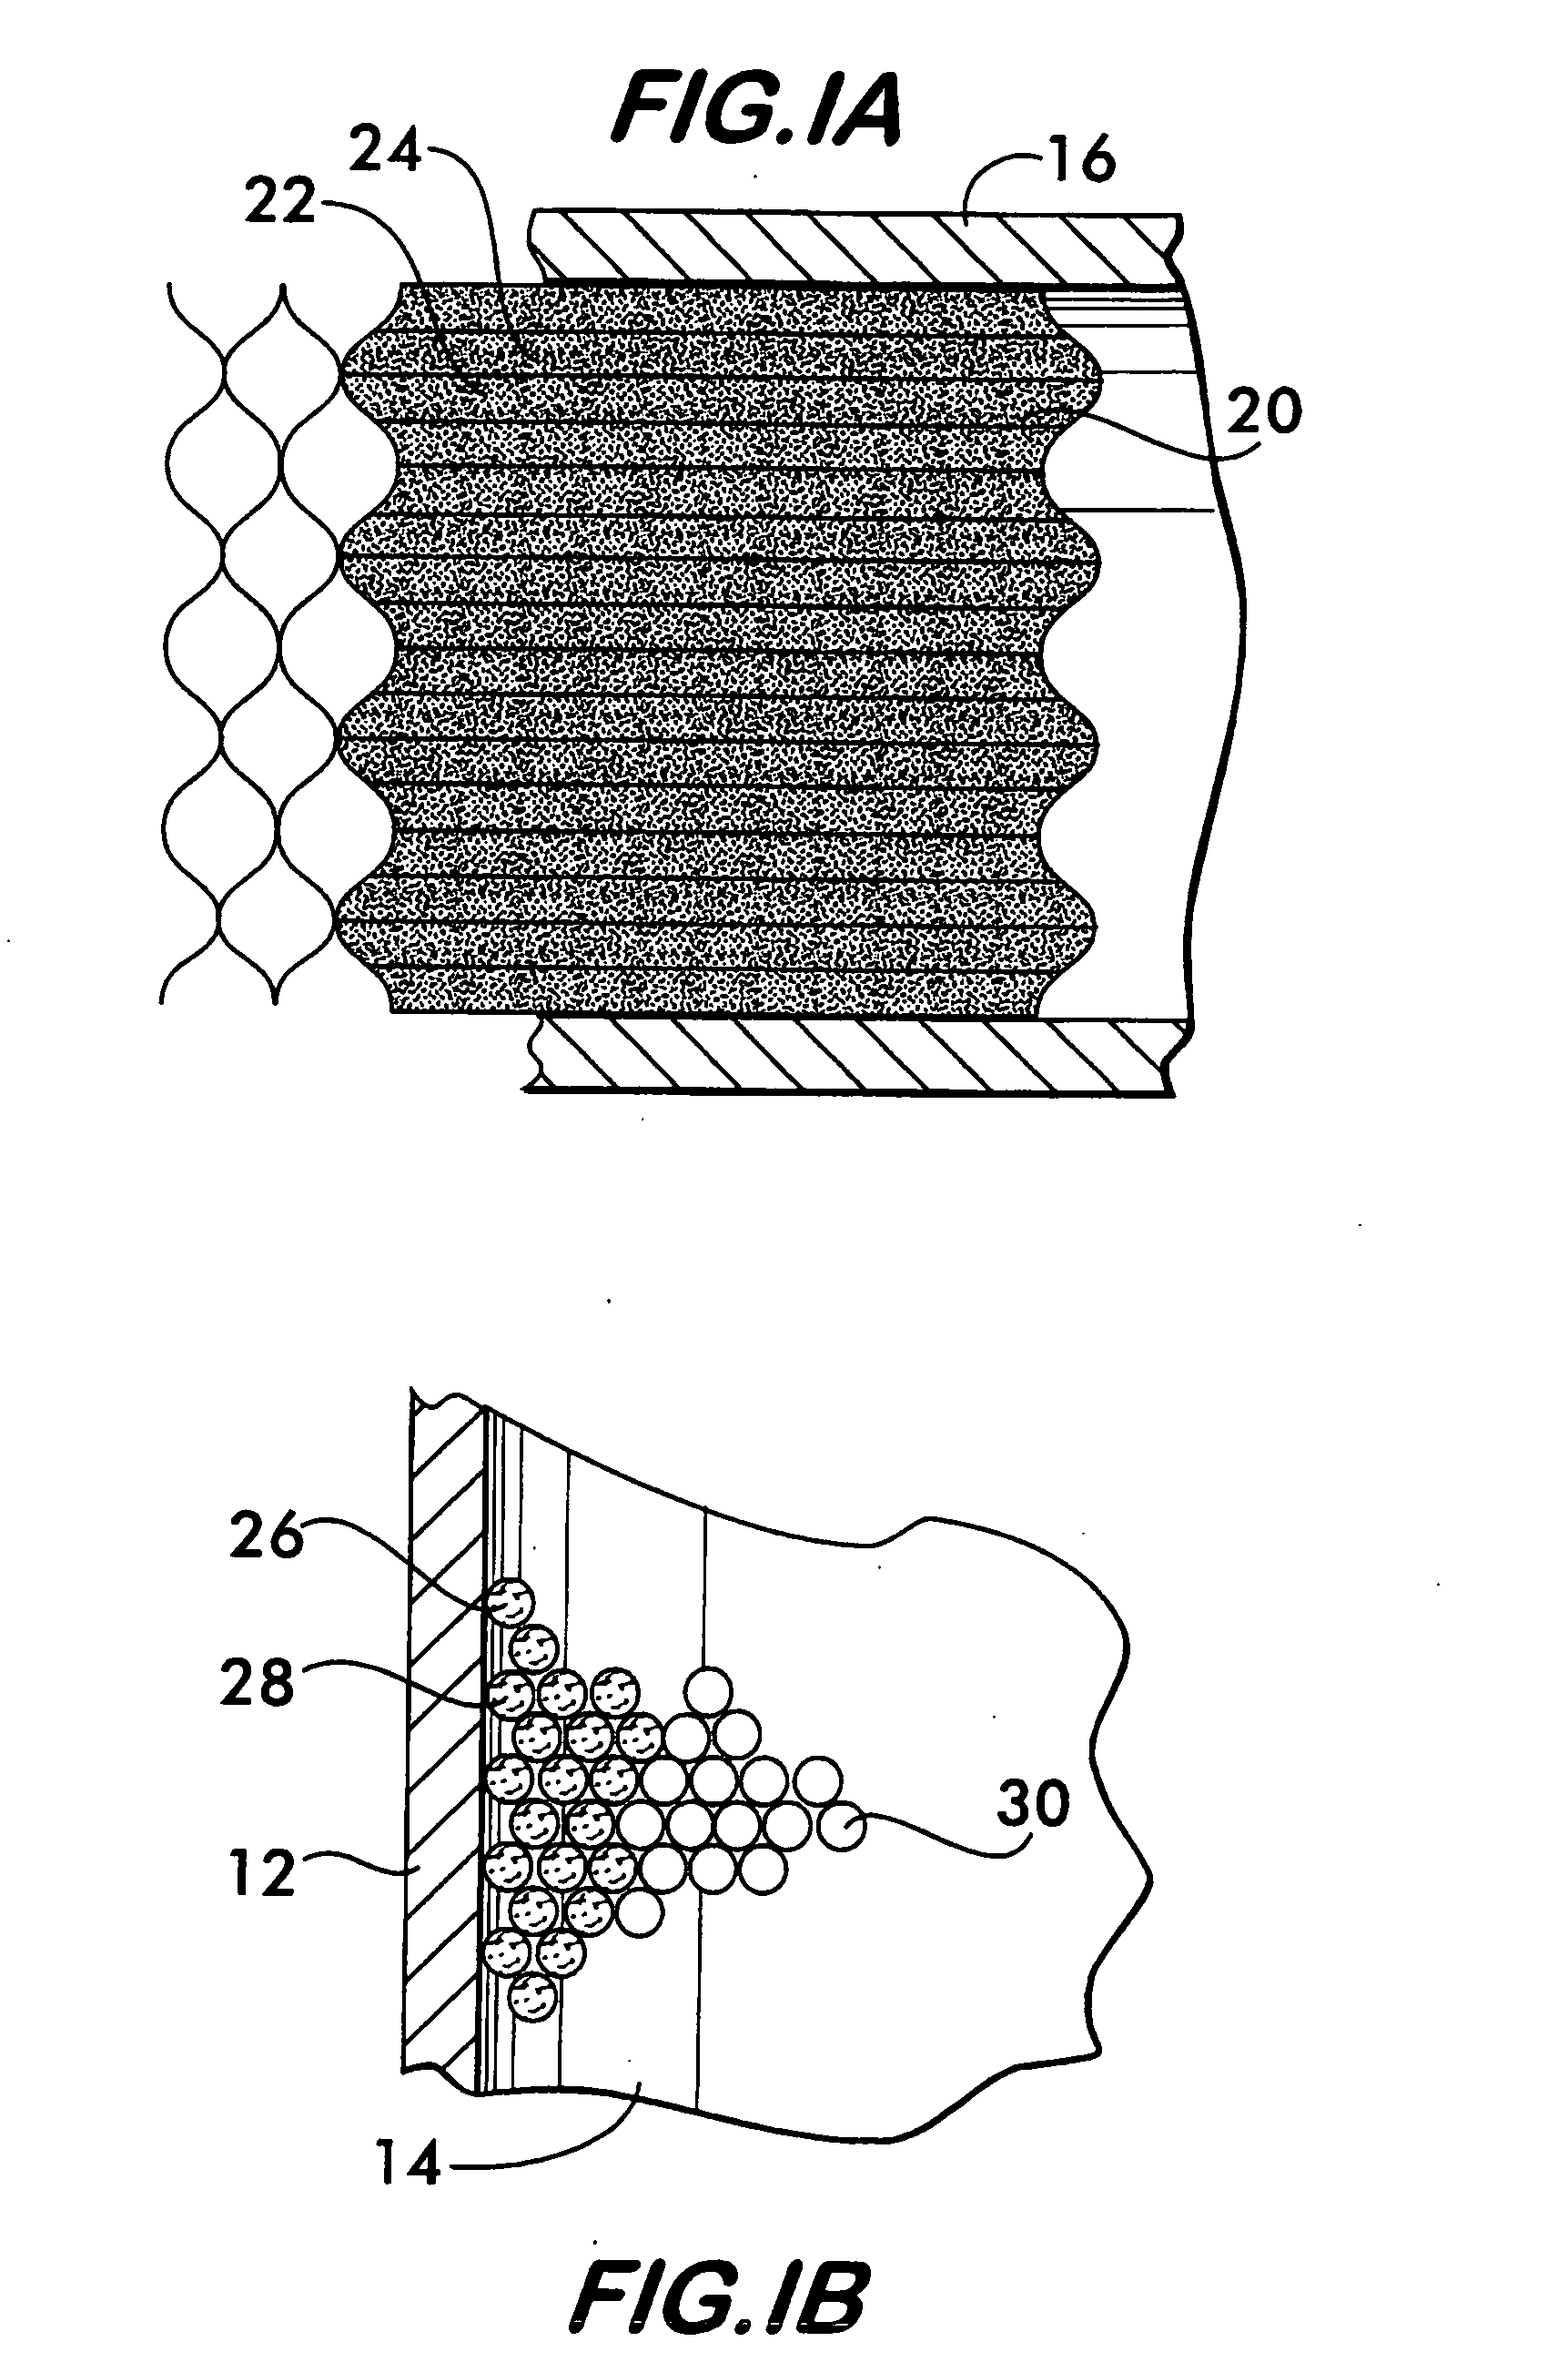 Process and apparatus for production of hydrogen using the water gas shift reaction